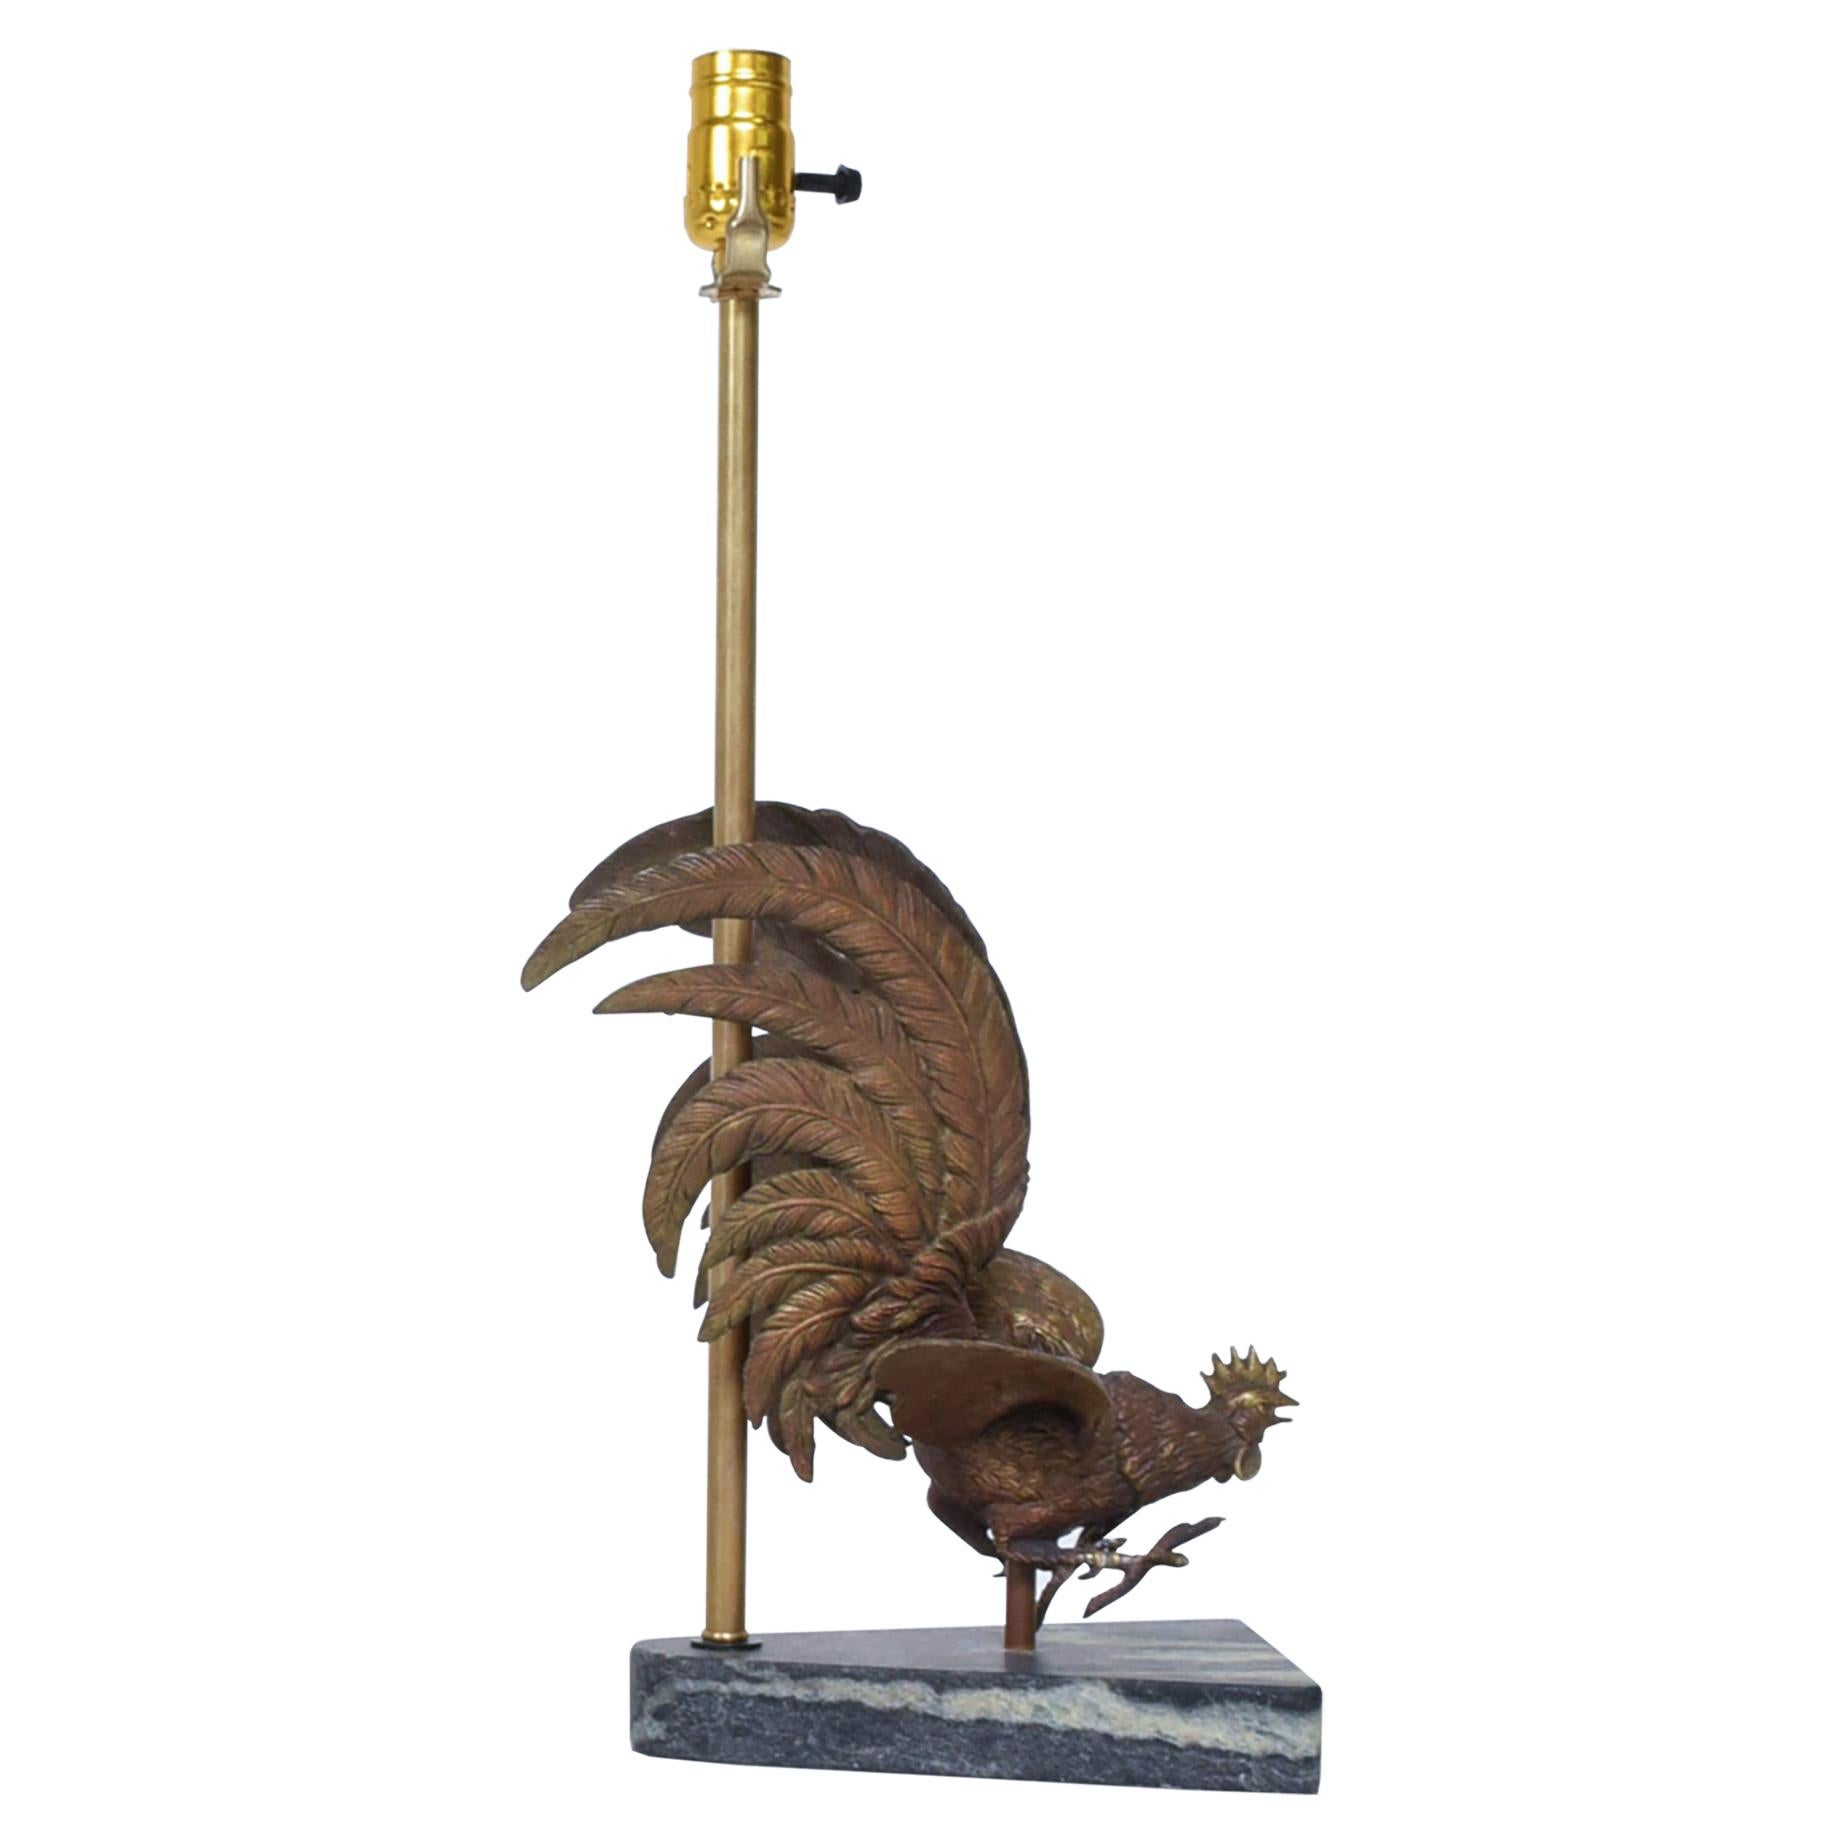 Table Lamp
Hollywood Regency Sassy Rooster in Bronze
Sculptural Table Lamp Midcentury Modern 1960s
Mounted on Green Marble base.
Unmarked. In the style of Maison Charles.
Dimensions:
20 1/2